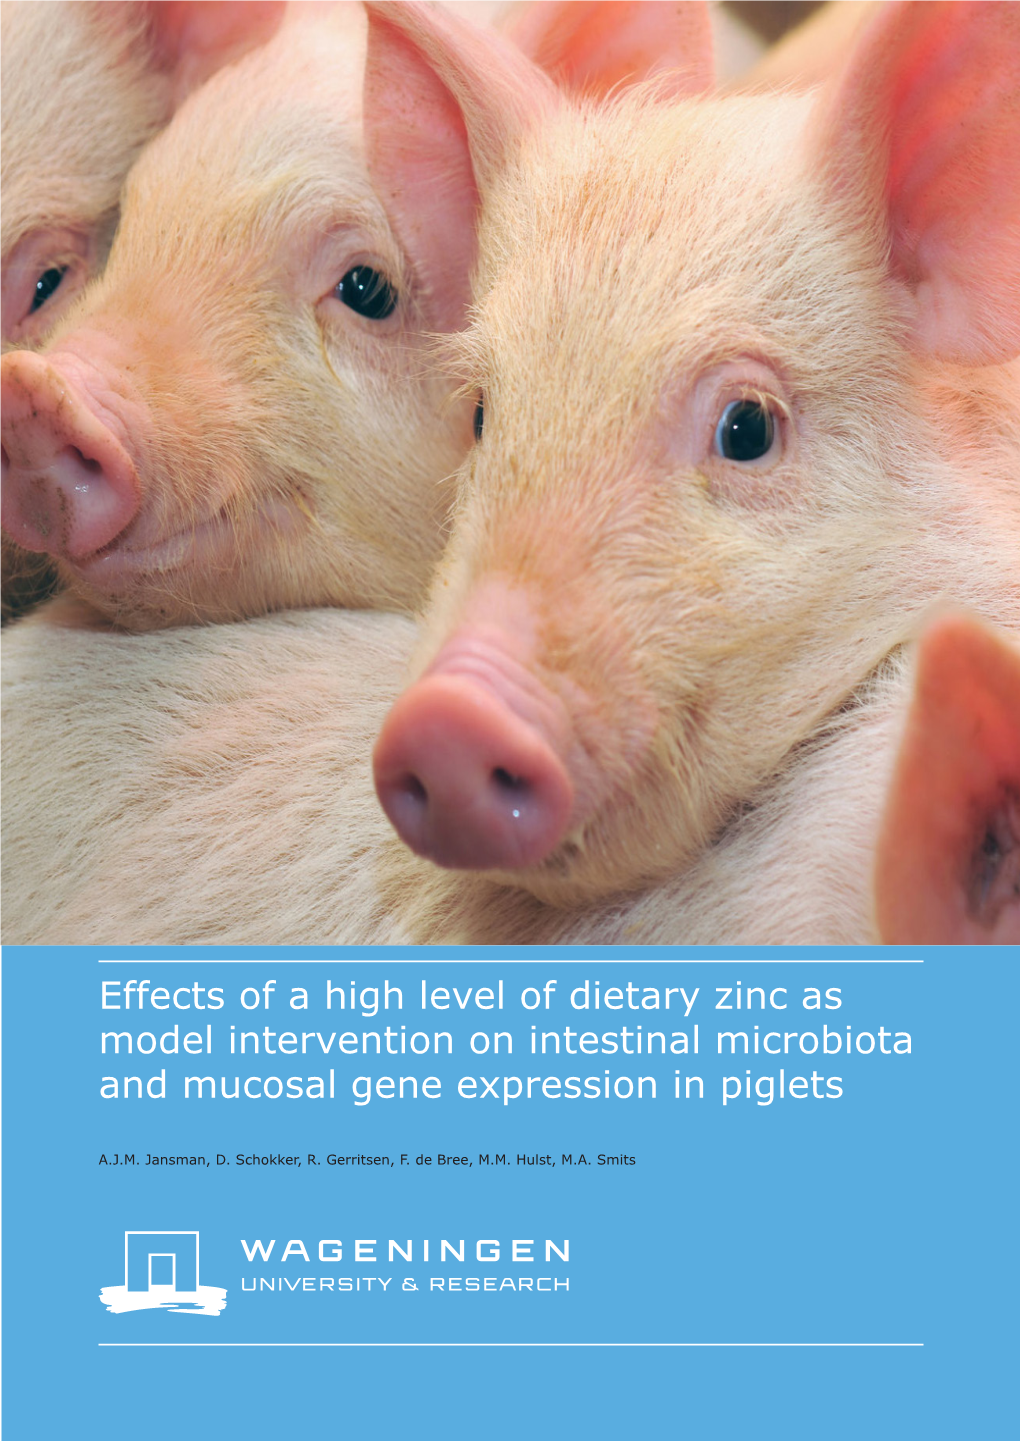 Effects of a High Level of Dietary Zinc As Model Intervention on Intestinal Microbiota and Mucosal Gene Expression in Piglets